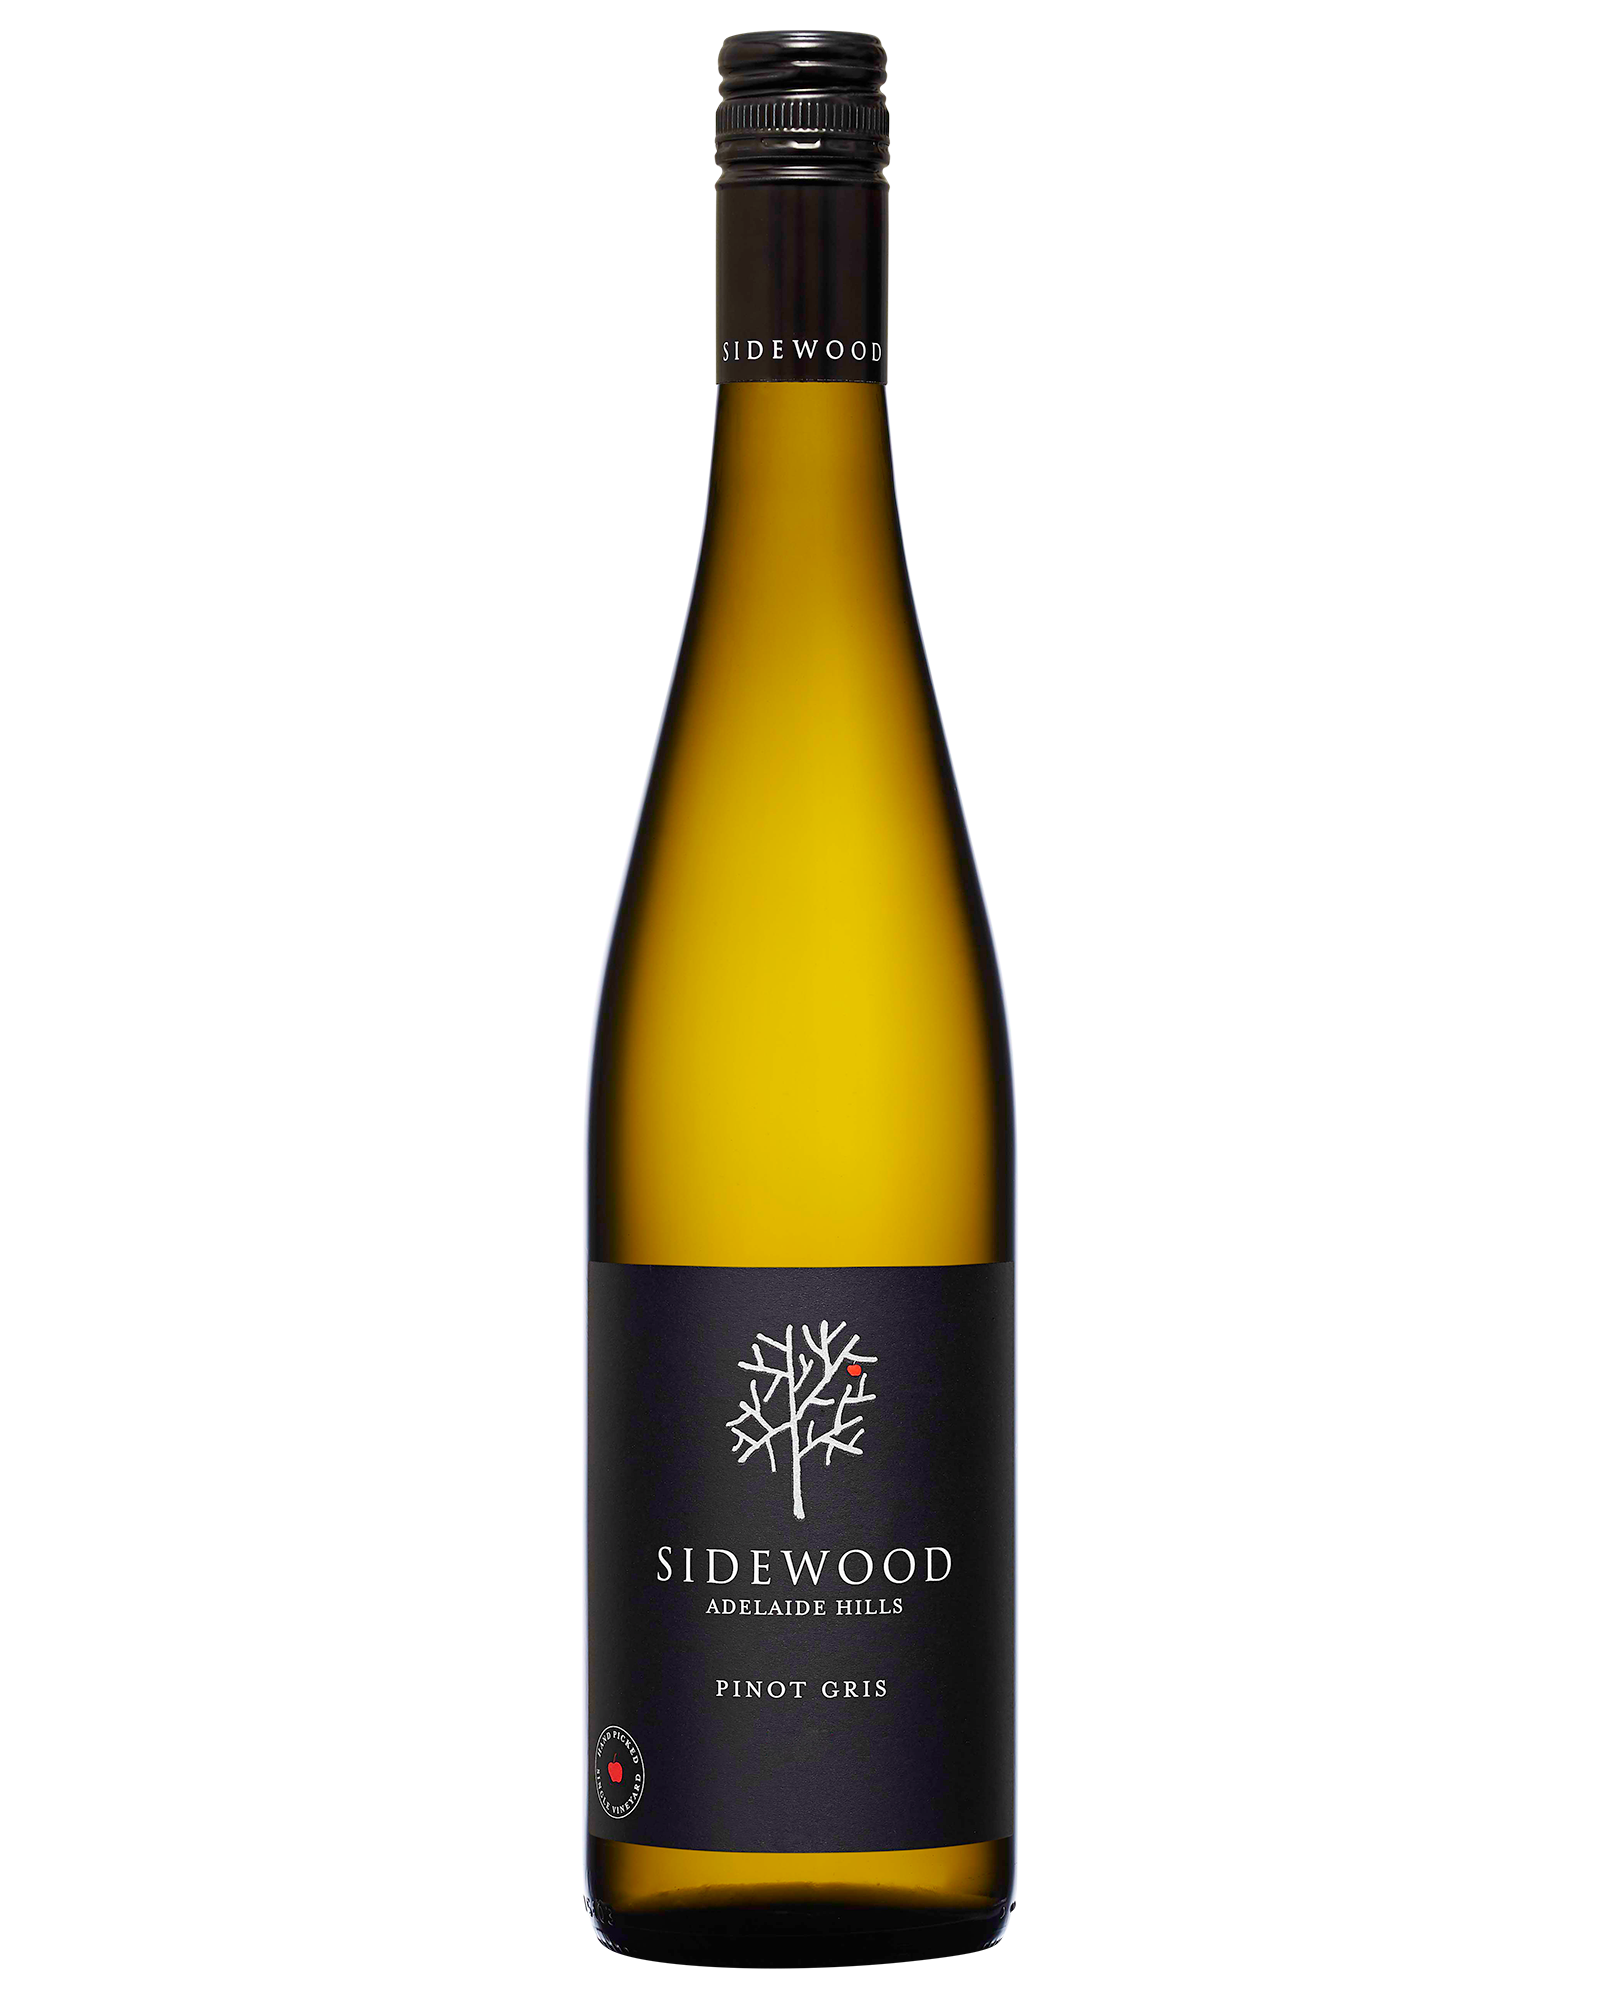 Sidewood Adelaide Hills Pinot Gris